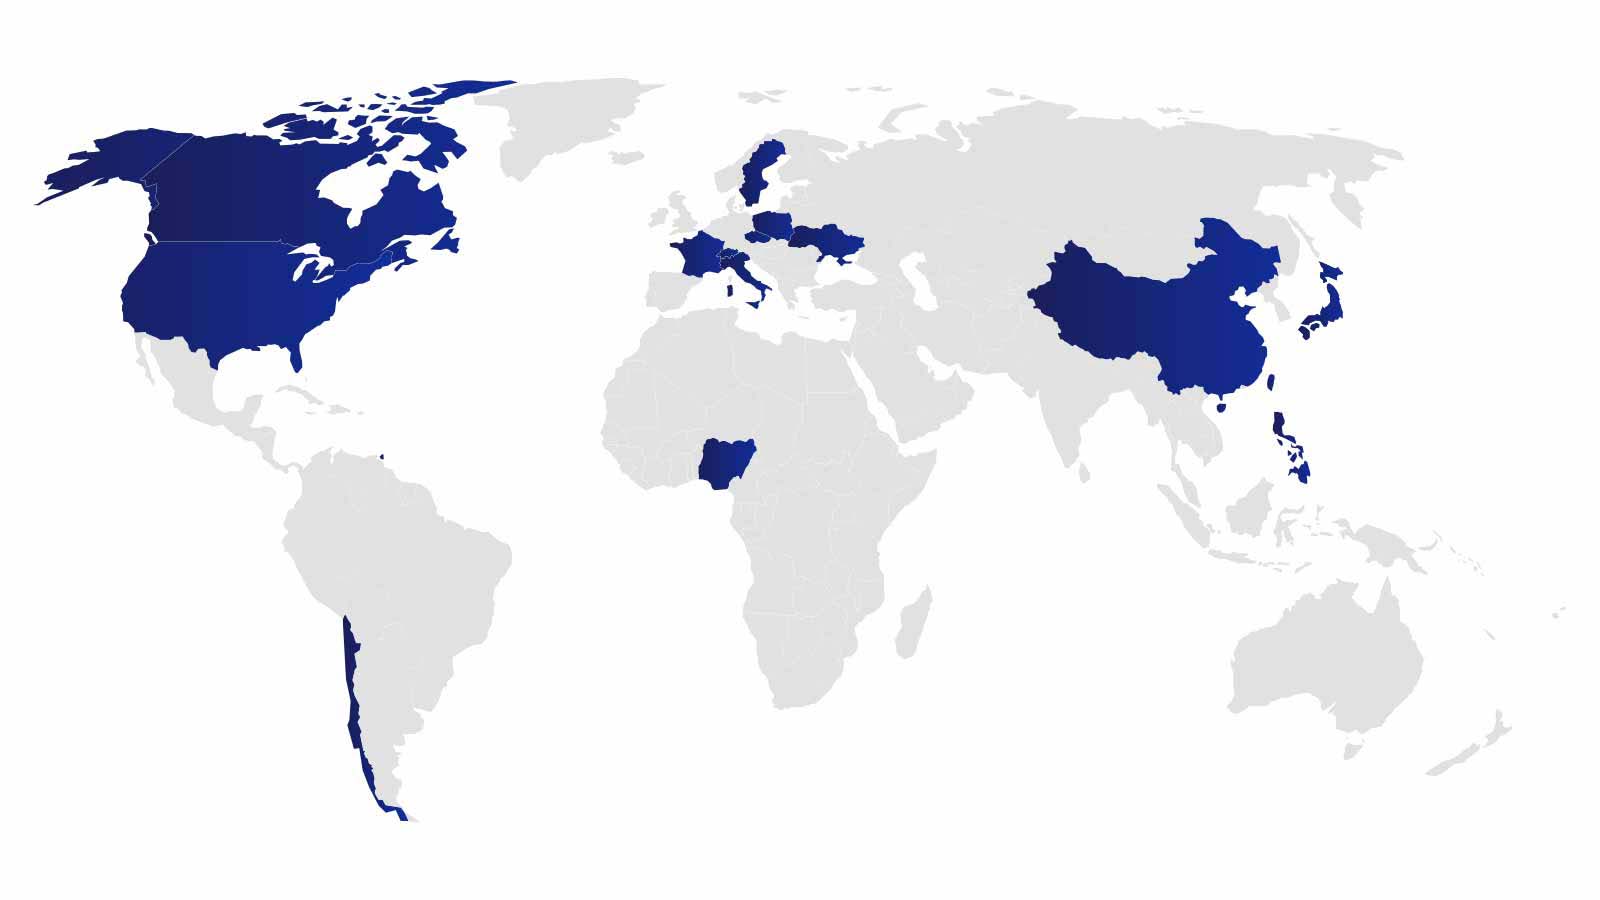 Map of countries/regions from where Team Visa athletes hail. See image description for more details.